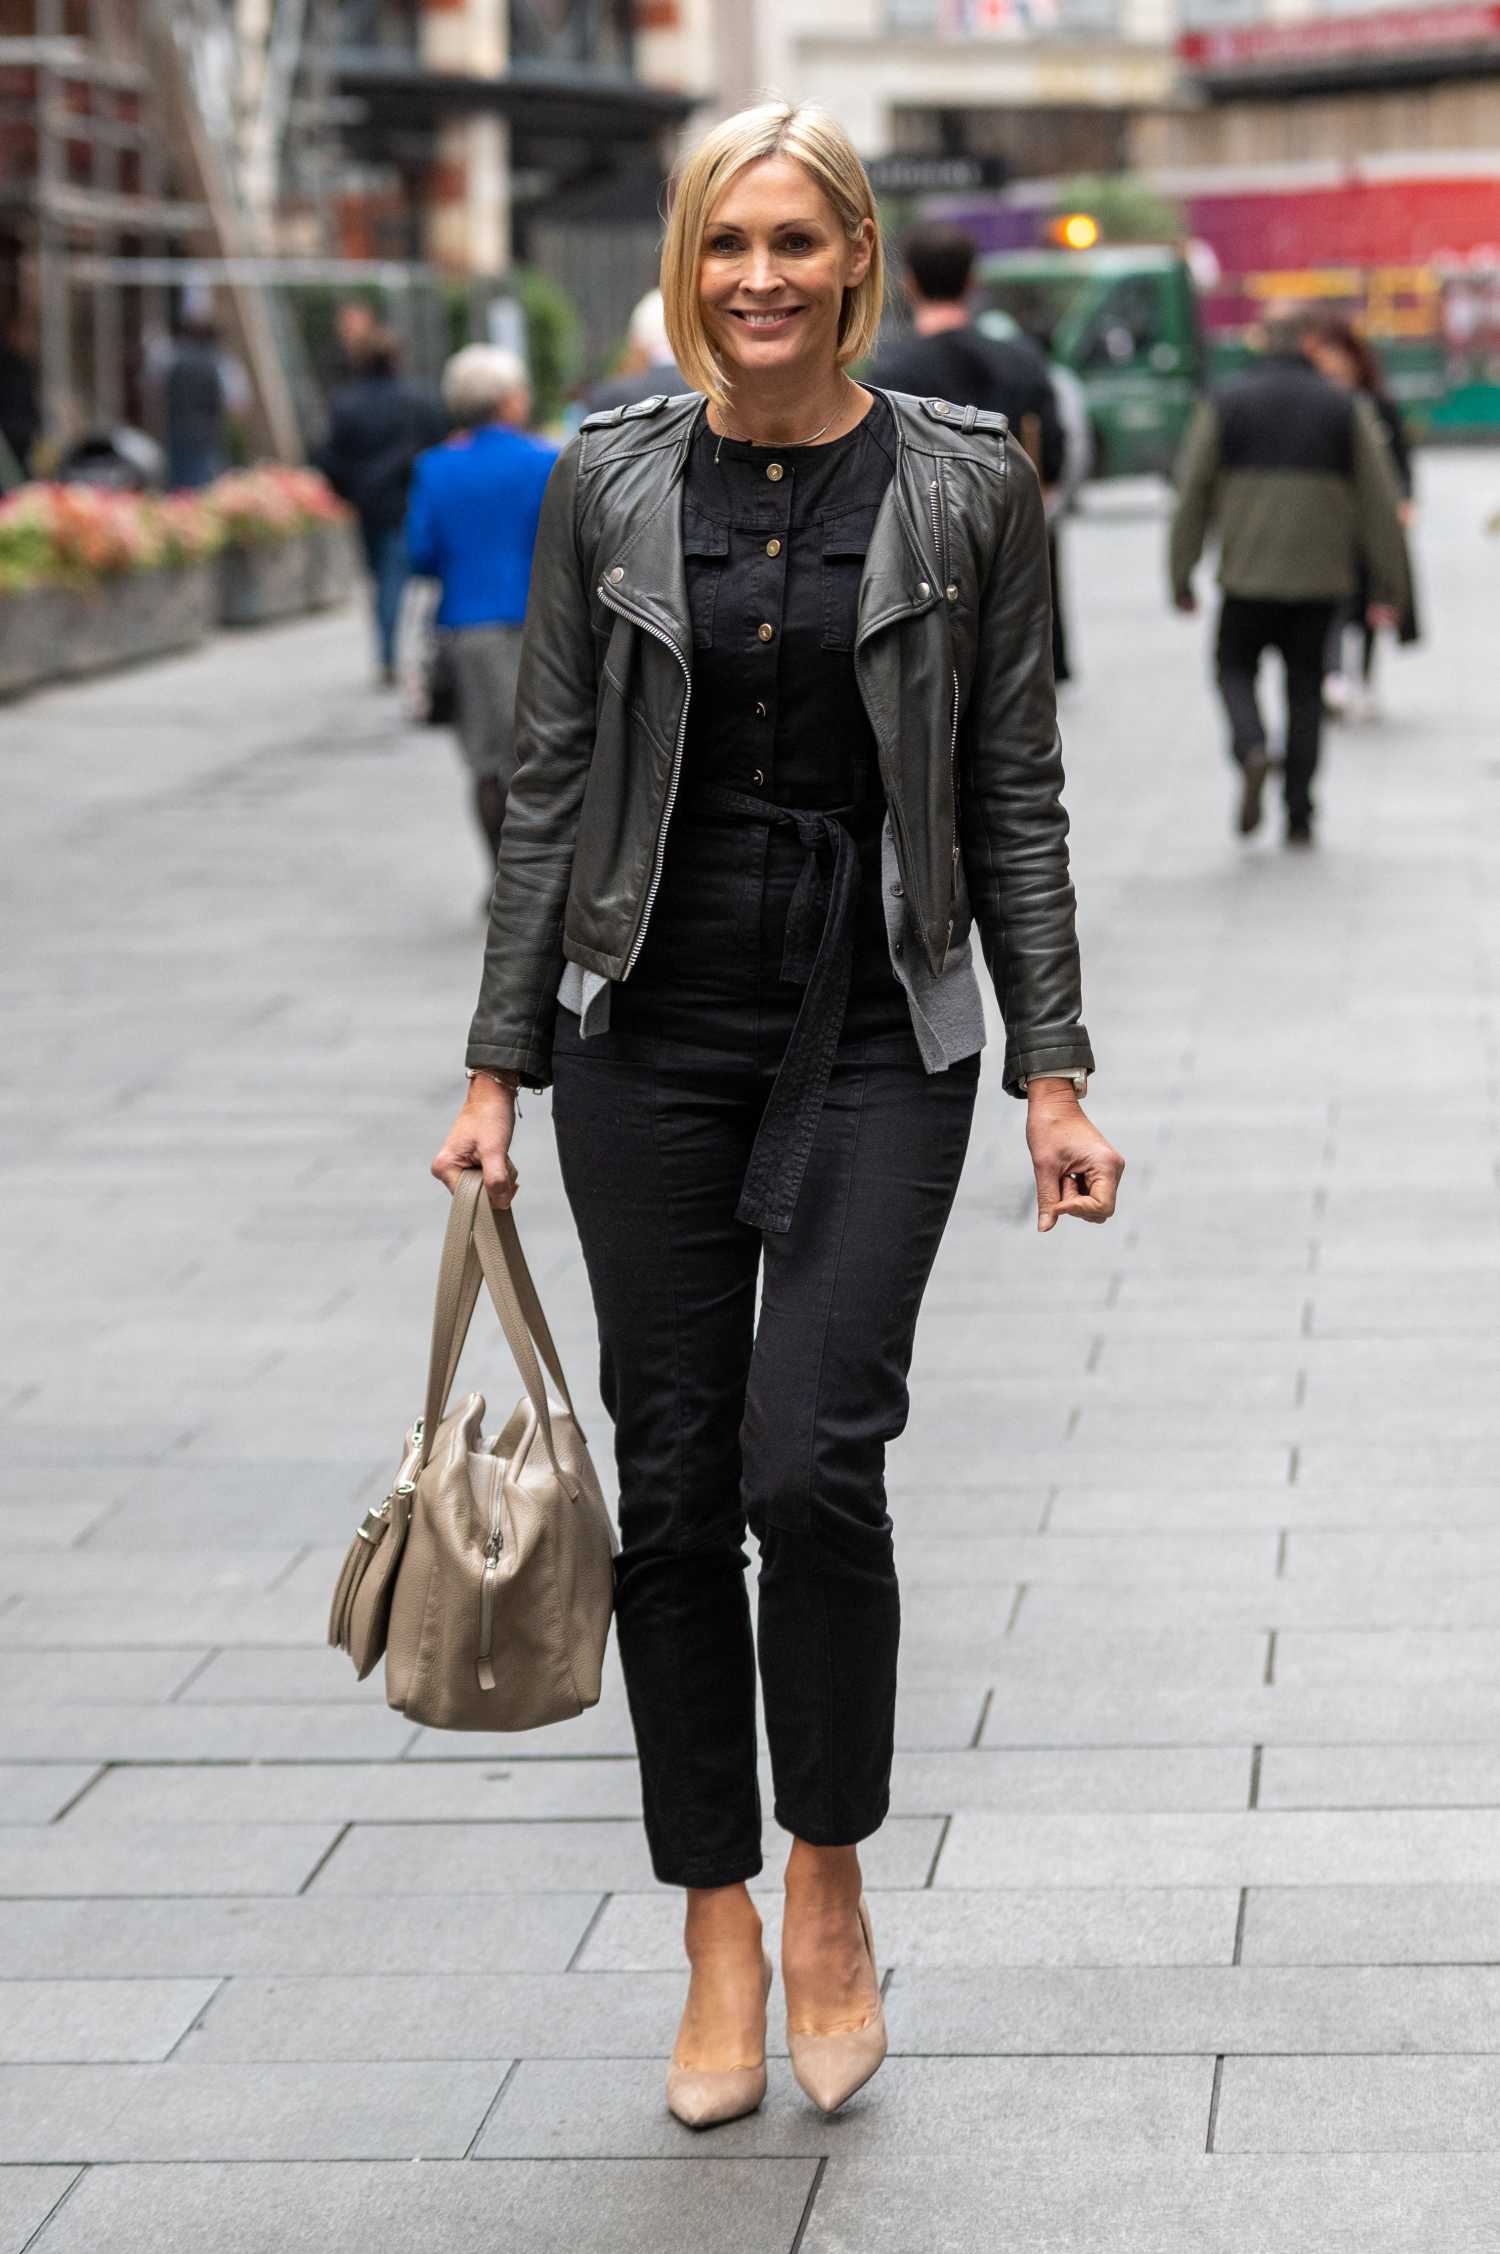 Jenni Falconer in a Black Leather Jacket Leaves the Global Studios in ...